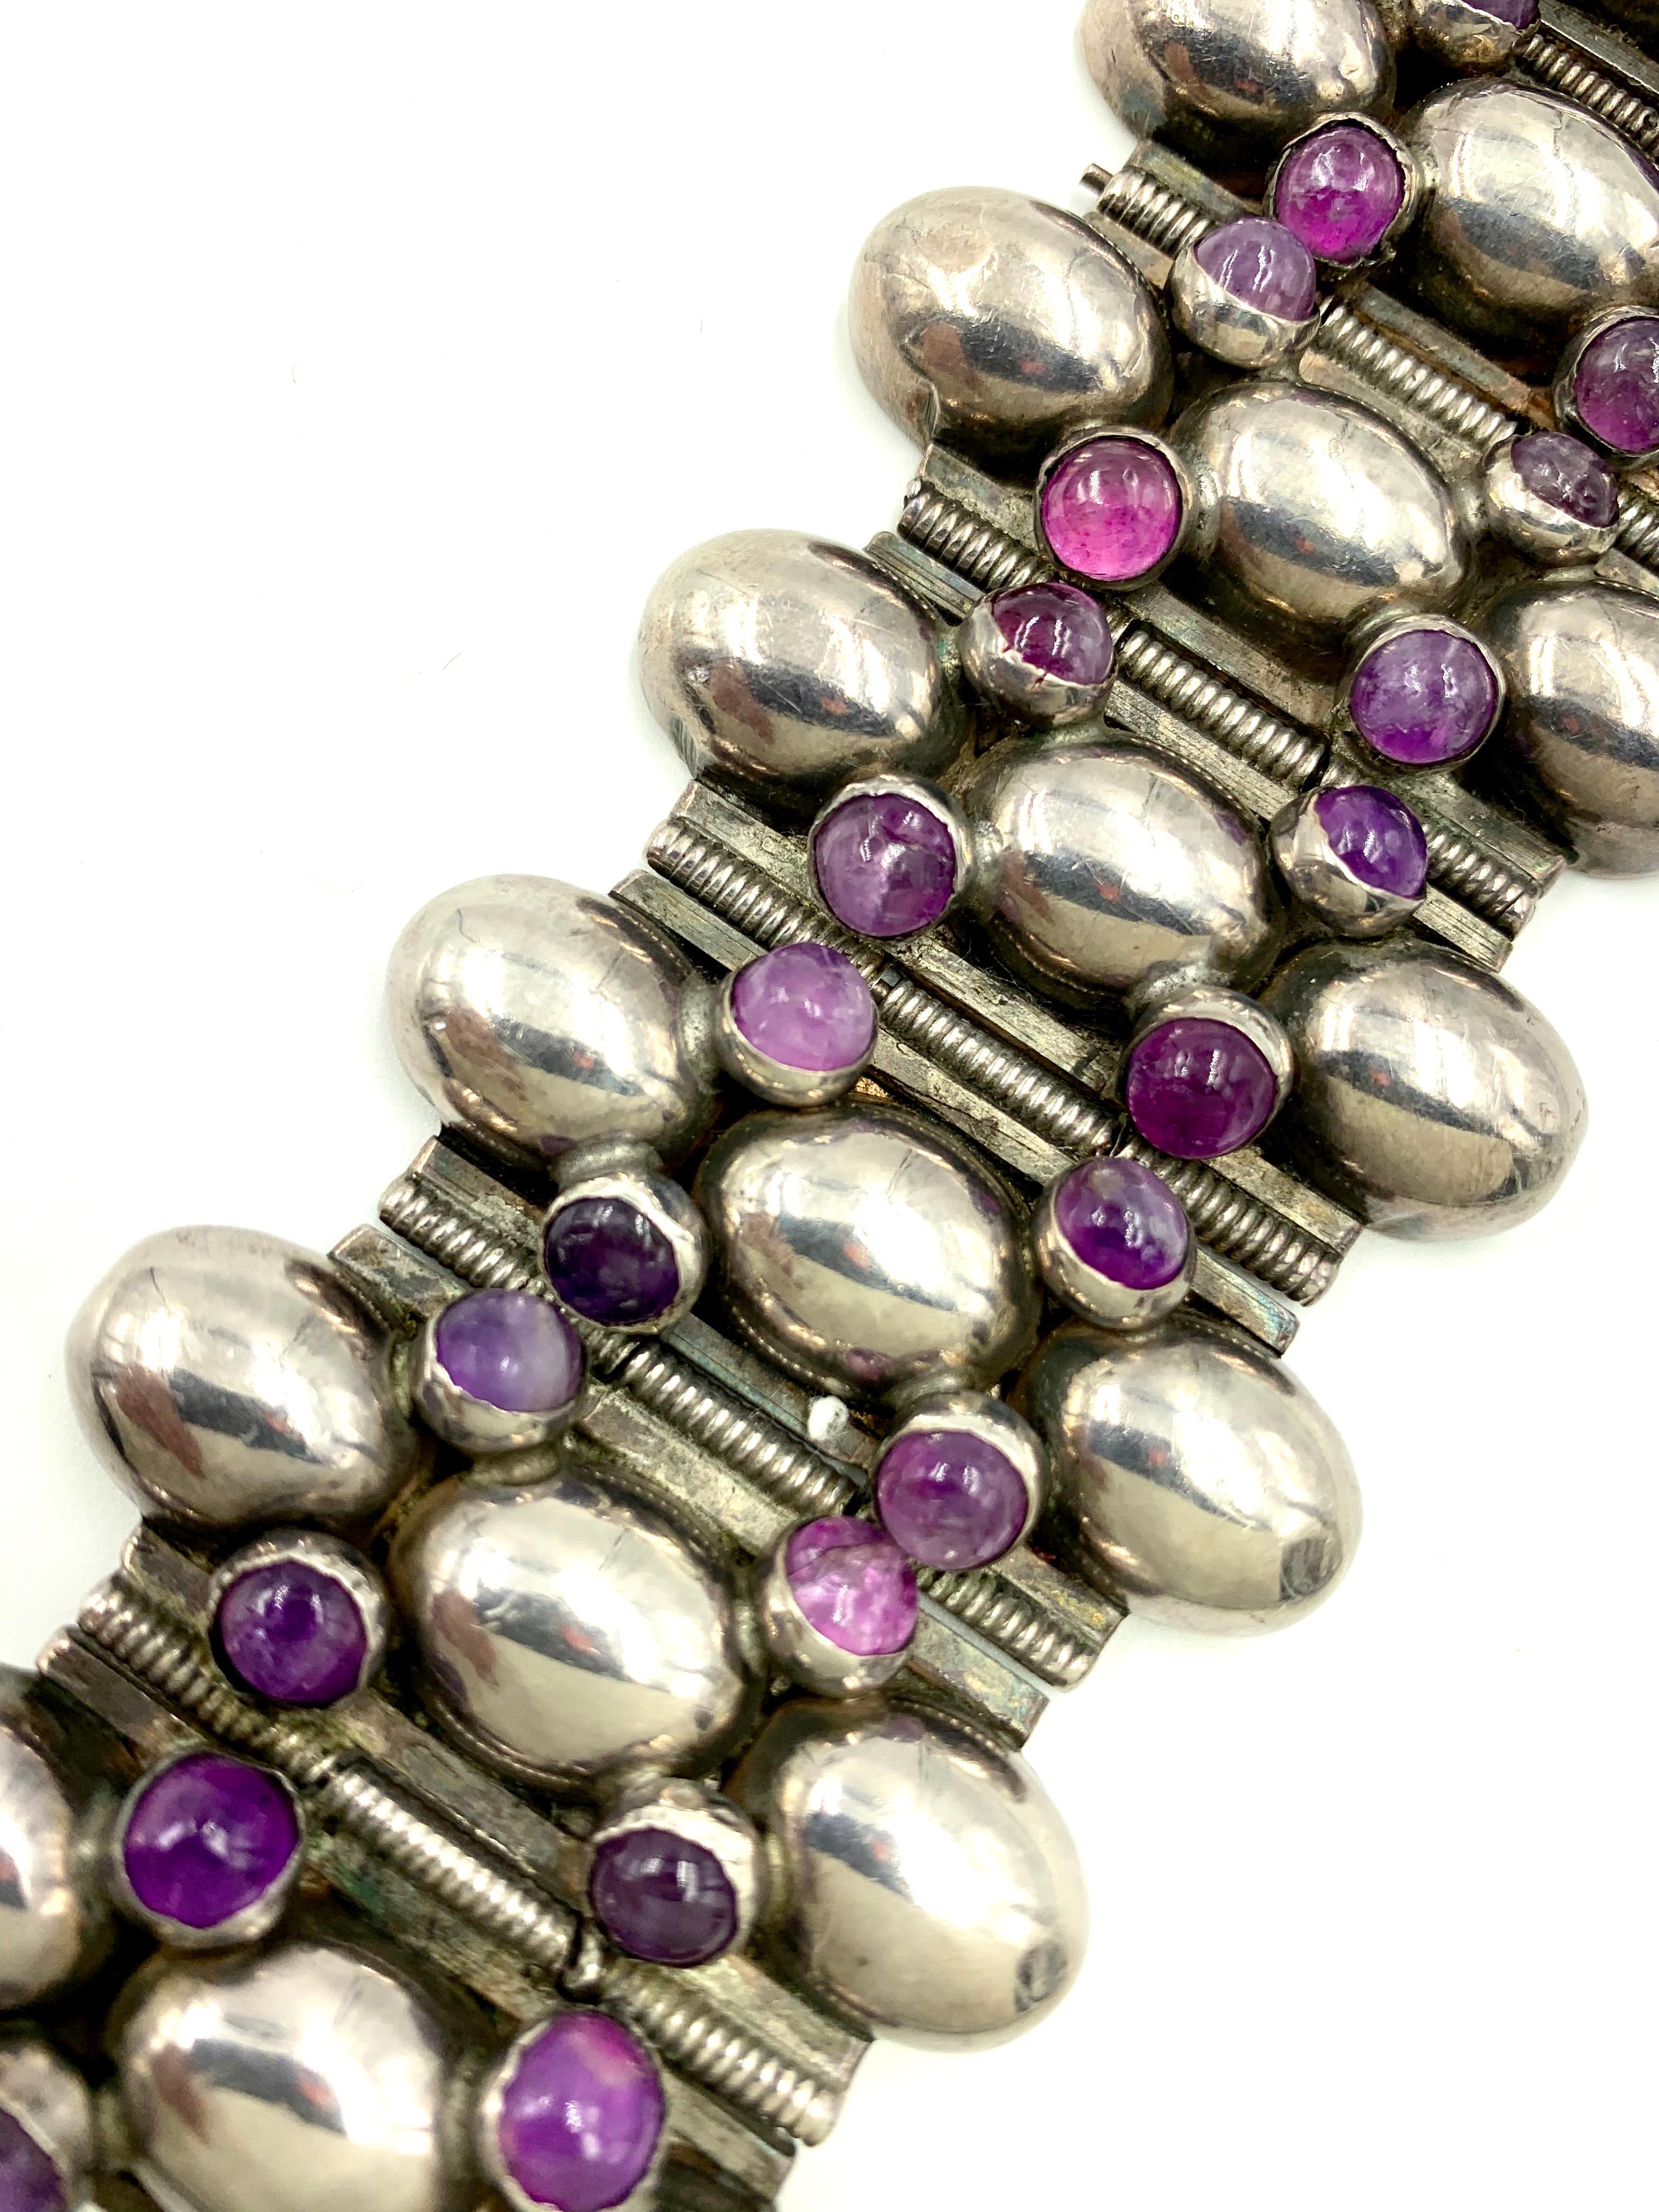 Spectacular, exceptionally large signed Fred Davis silver and cabochon Amethyst bracelet
circa 1940
Taxco Mexican Modernist Movement
7.25 inches long, 1.8 inches wide, marked Silver Mexico and FD monogram on back

Frederick W. Davis (1877-1961) was